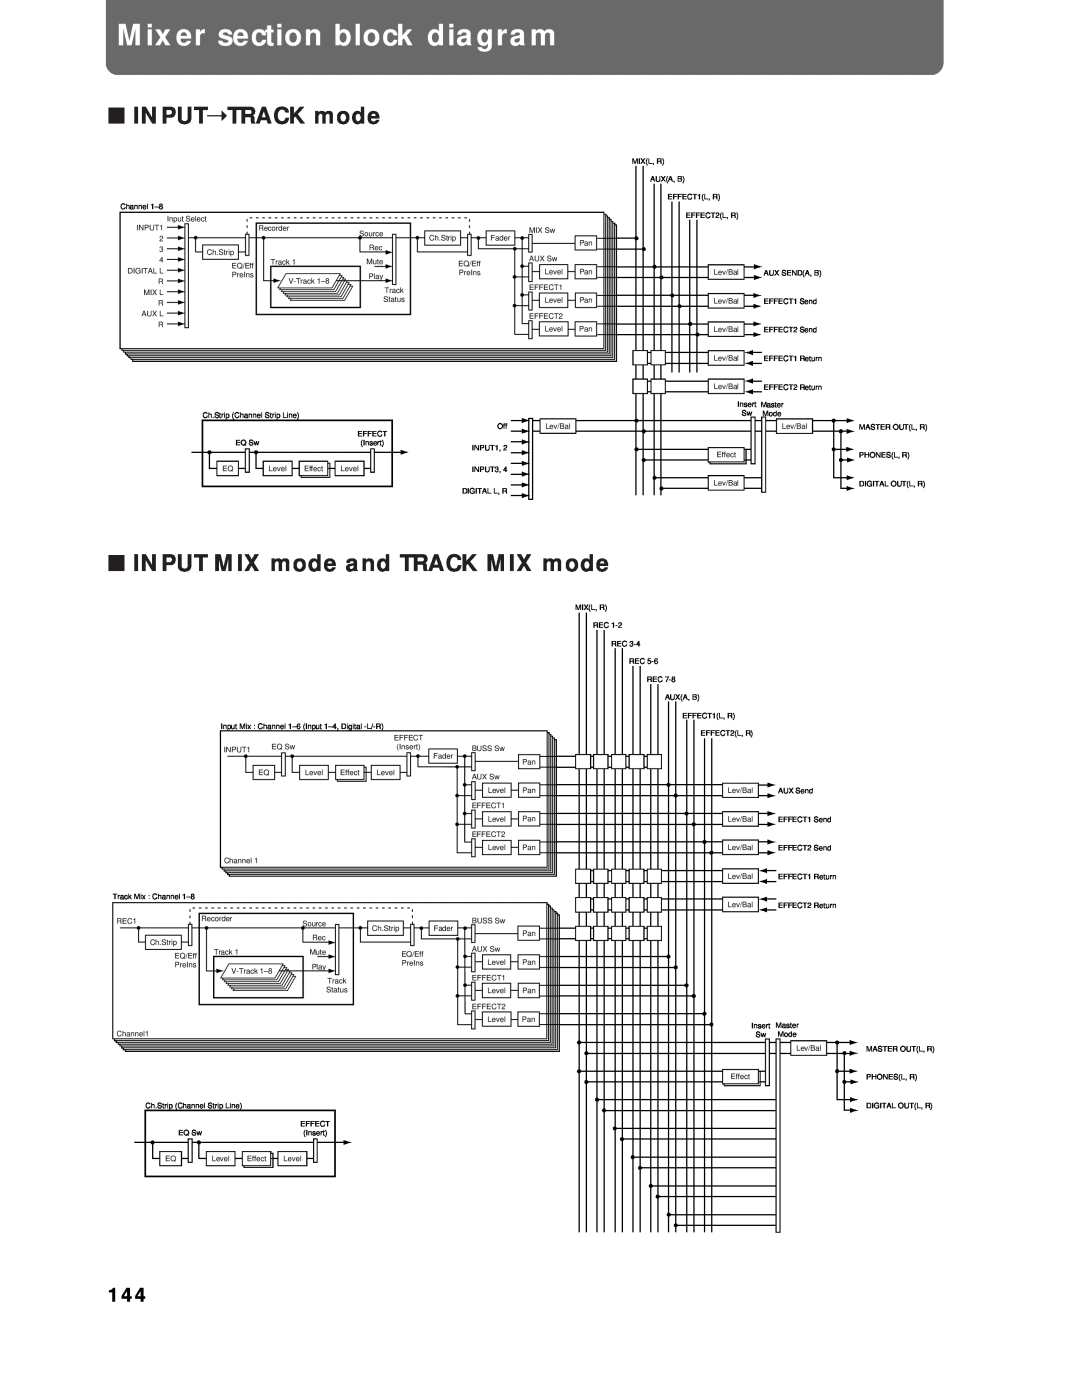 Roland Vs-880 important safety instructions Mixer section block diagram, INPUTTRACK mode, INPUT MIX mode and TRACK MIX mode 